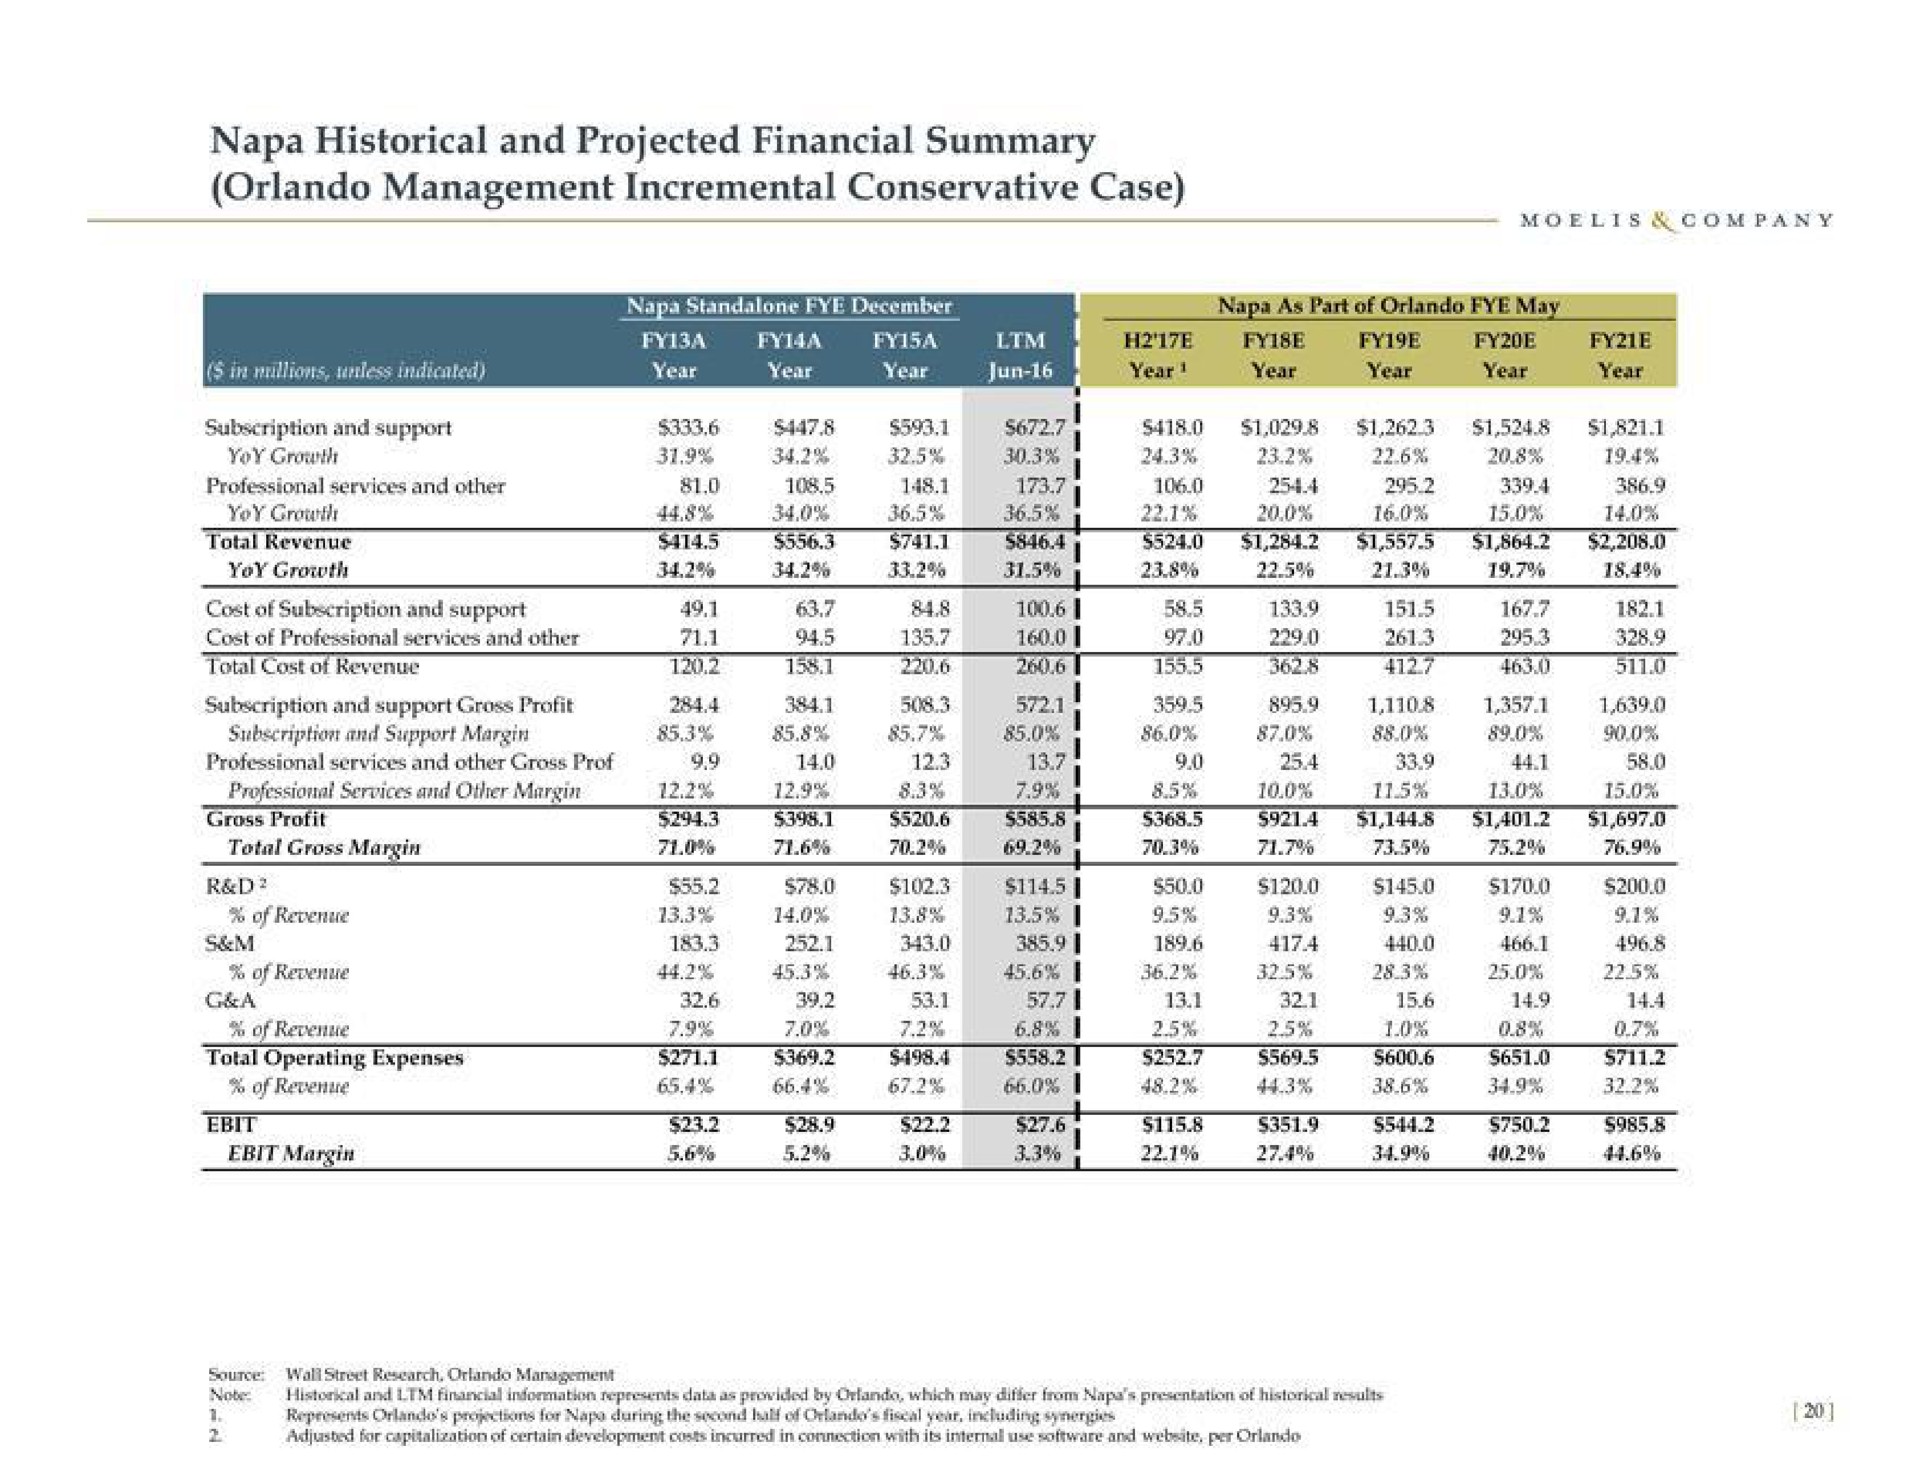 napa historical and projected financial summary management incremental conservative case see he | Moelis & Company